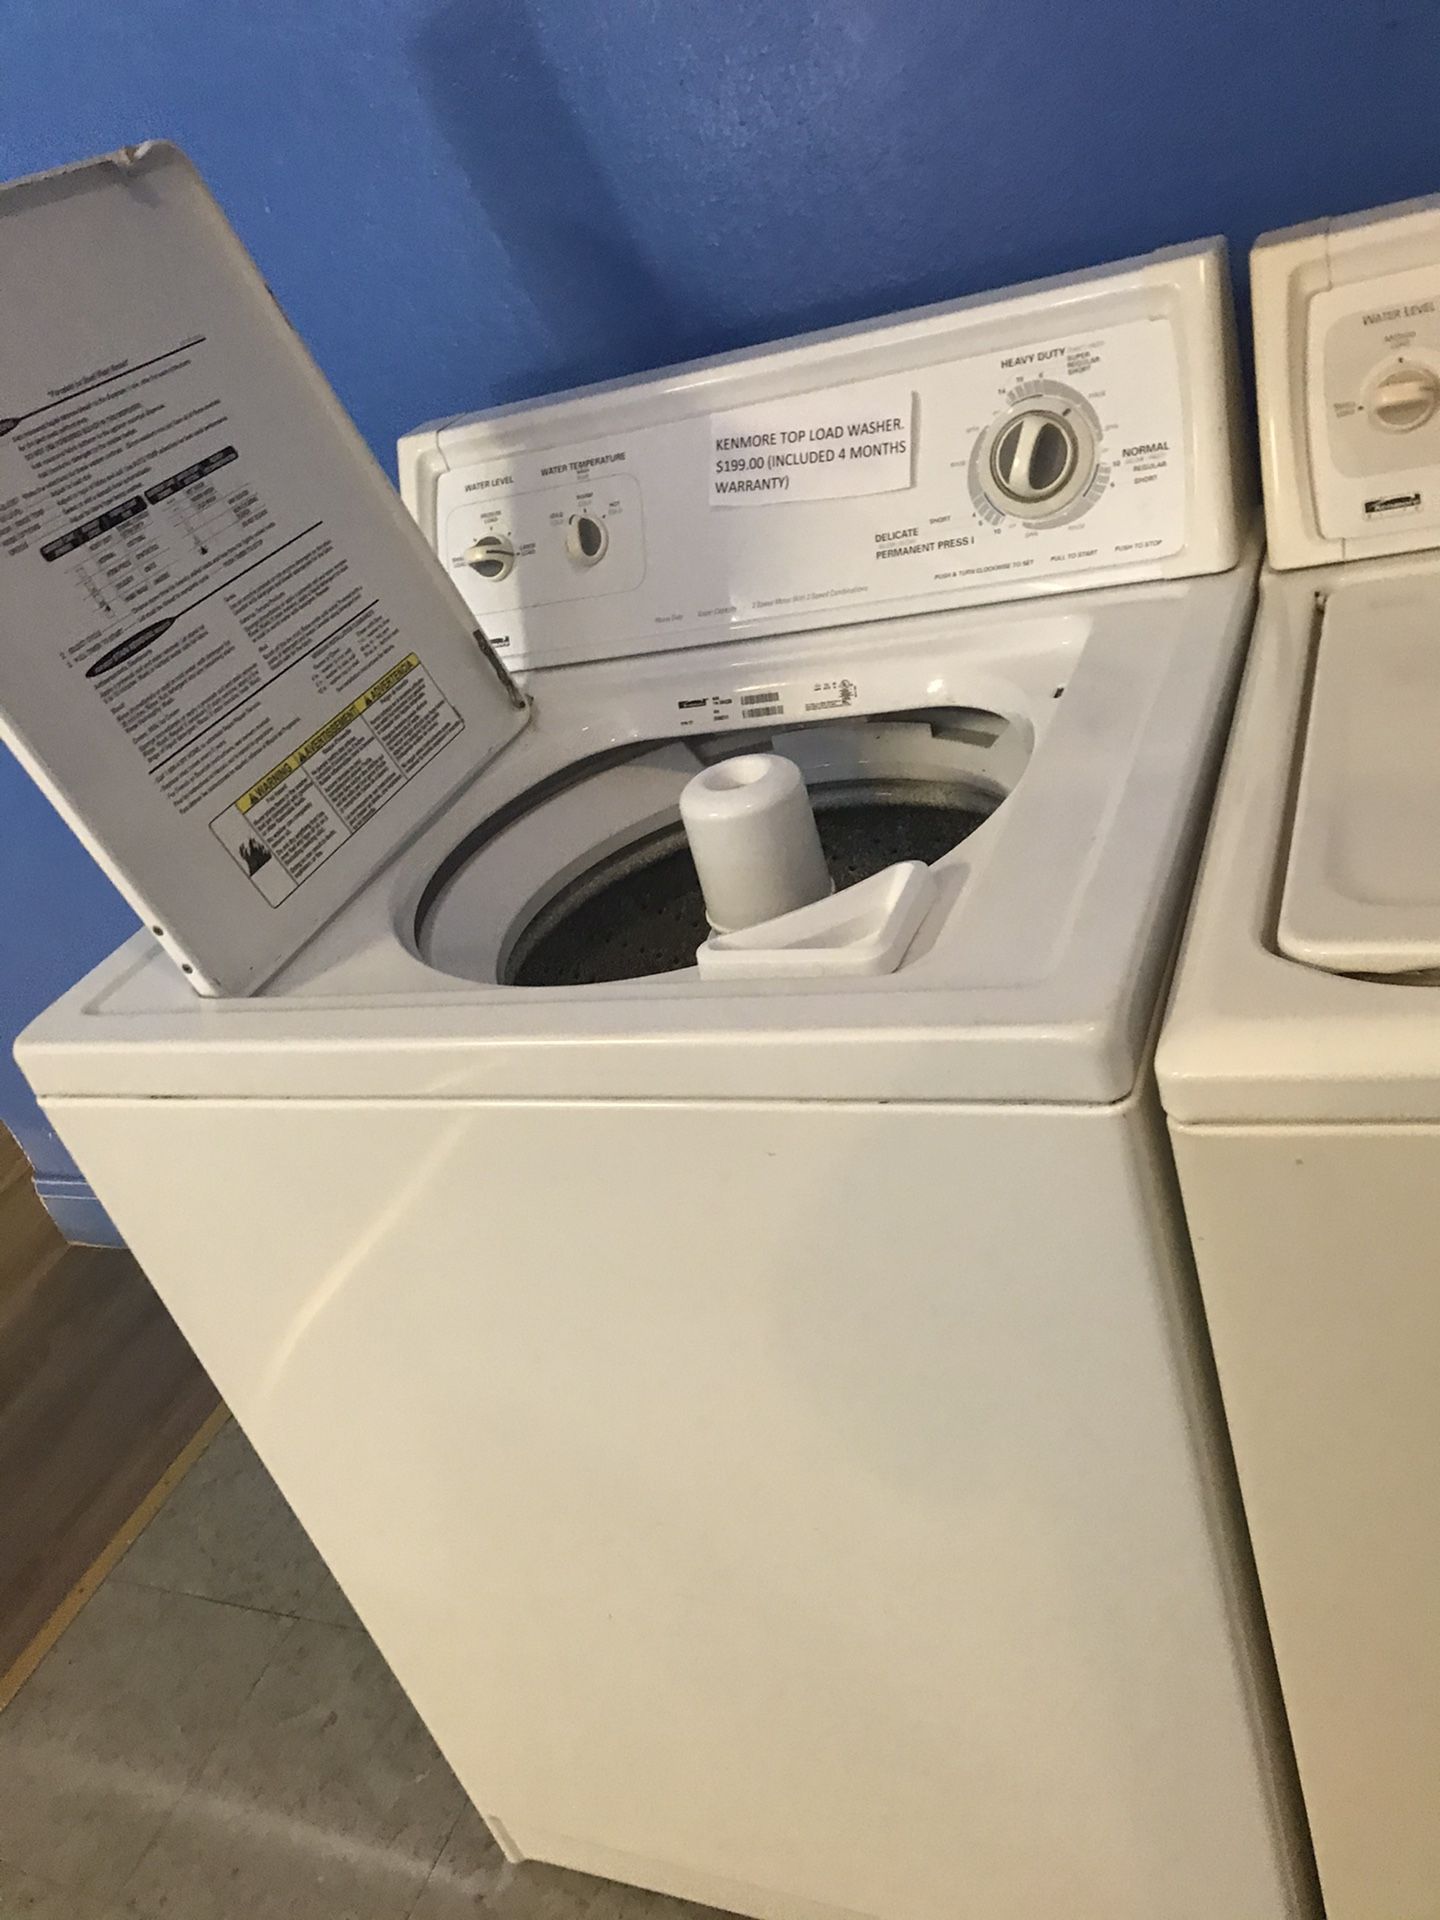 Top load washer working perfectly 4 moths warranty